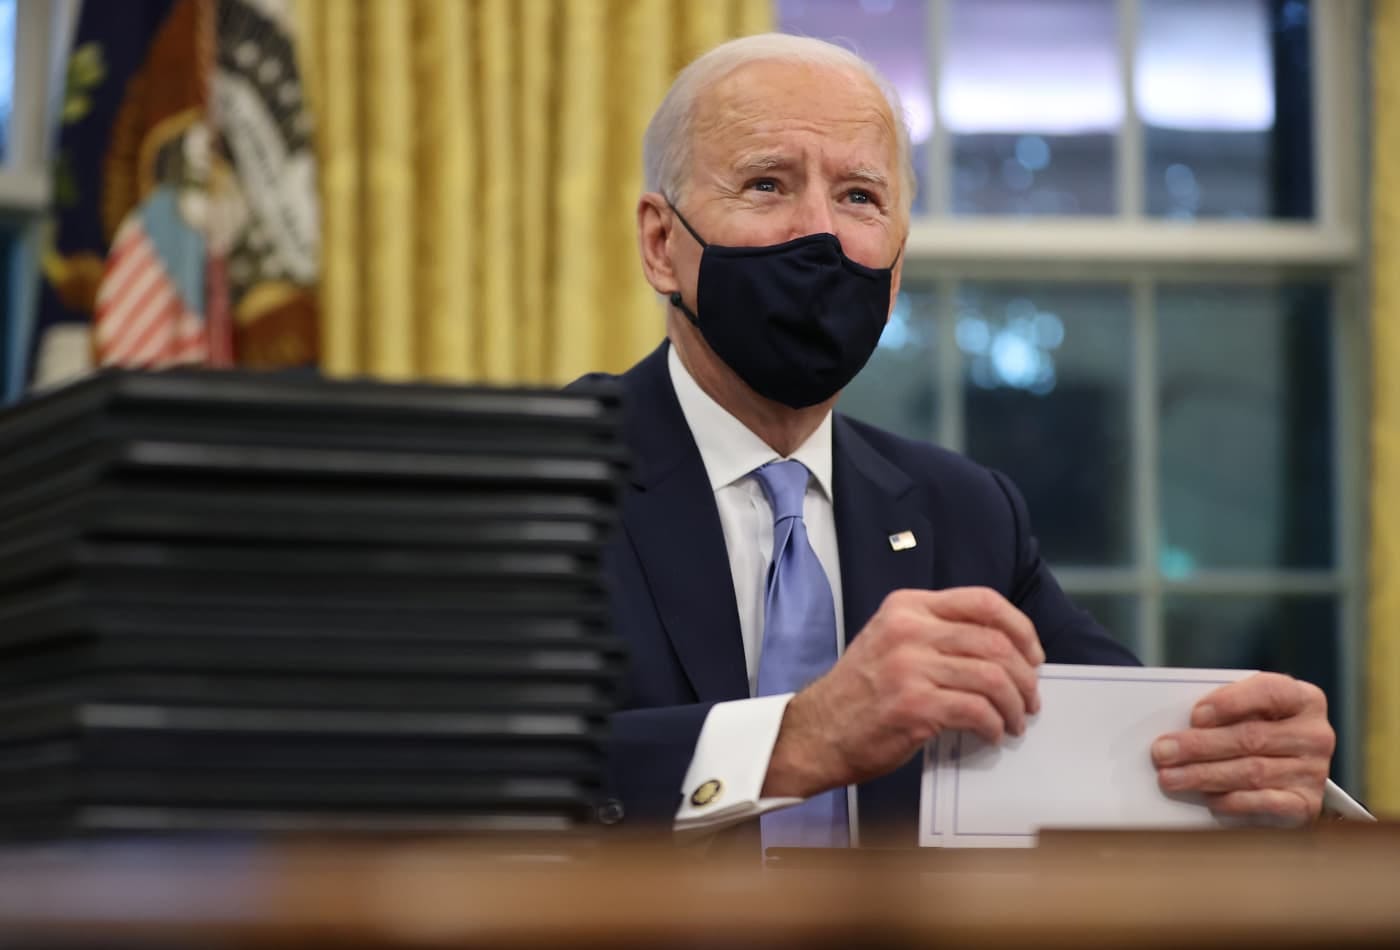 President Joe Biden prepares to sign a series of executive orders at the Resolute Desk in the Oval Office just hours after his inauguration on January 20, 2021 in Washington.